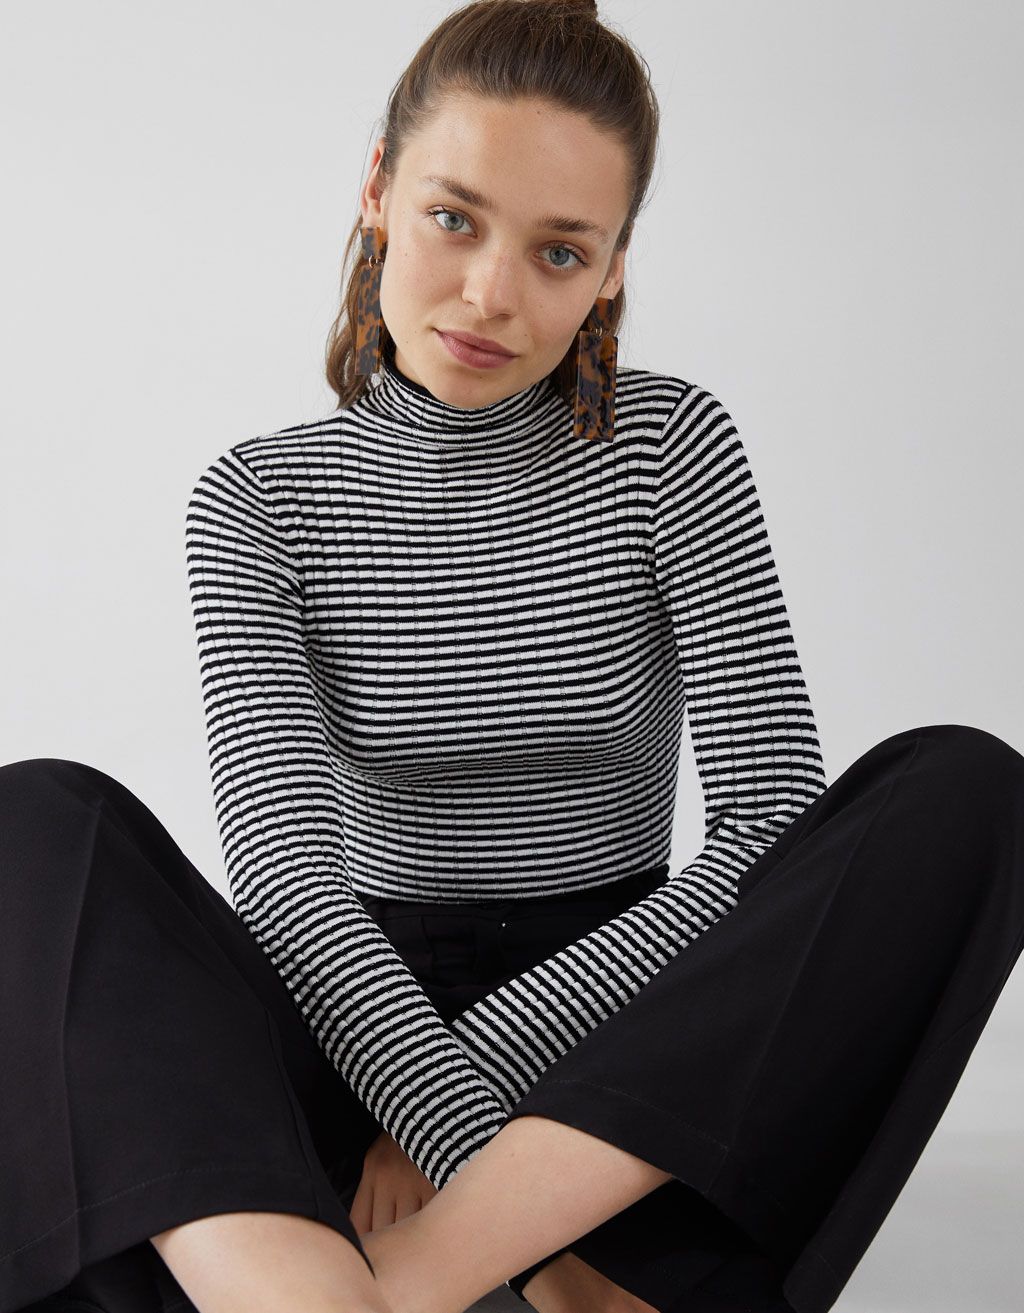 20 Ribbed Turtlenecks to Layer With Your Winter Outfits | Who What Wear